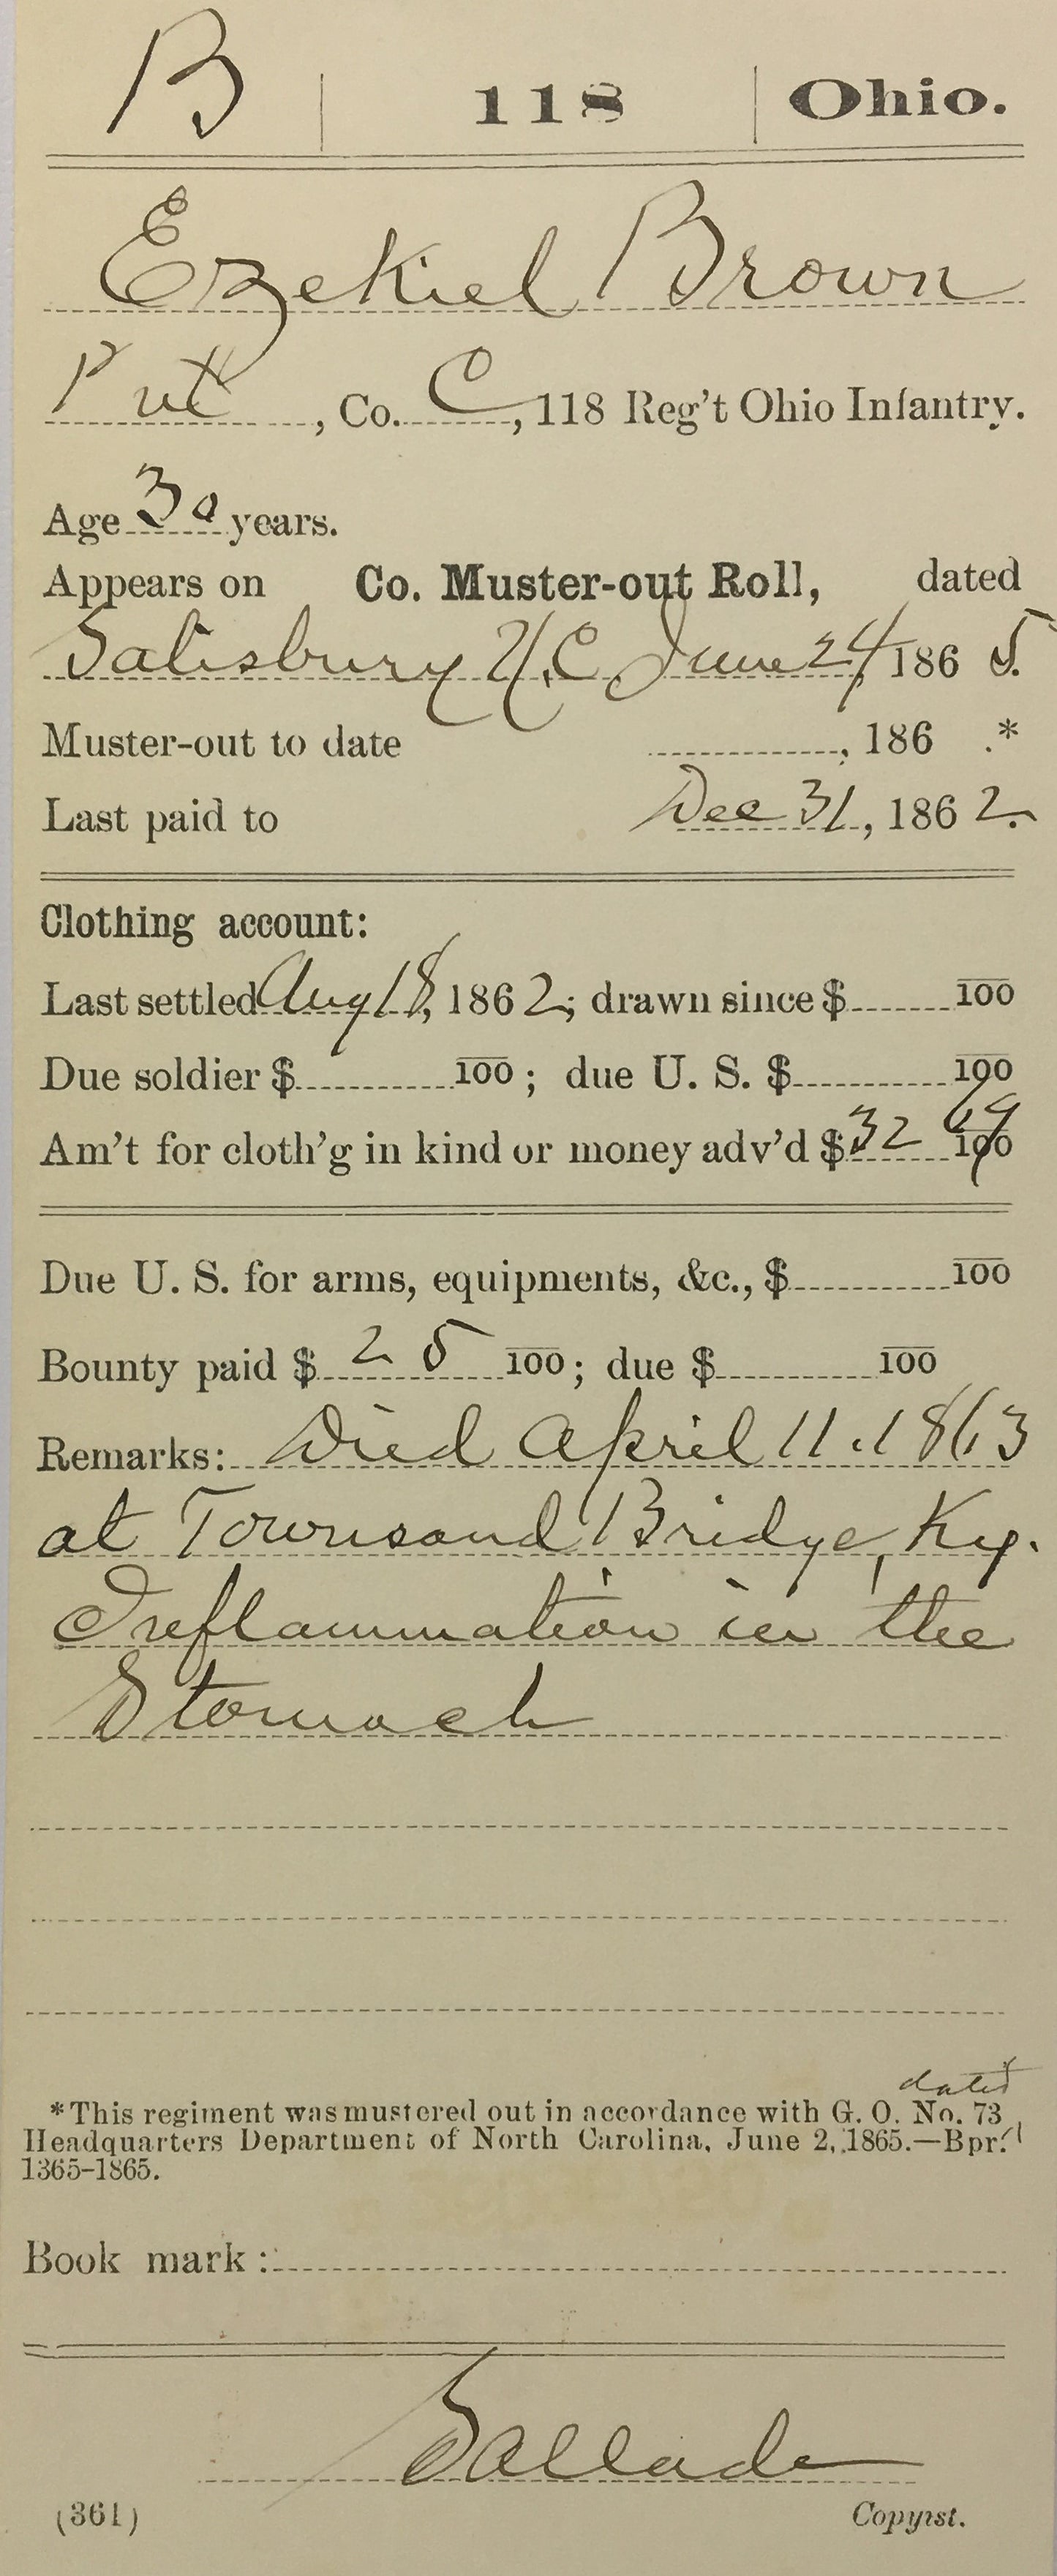 "The Basics" Full Civil War Pension File and Compiled Service Records